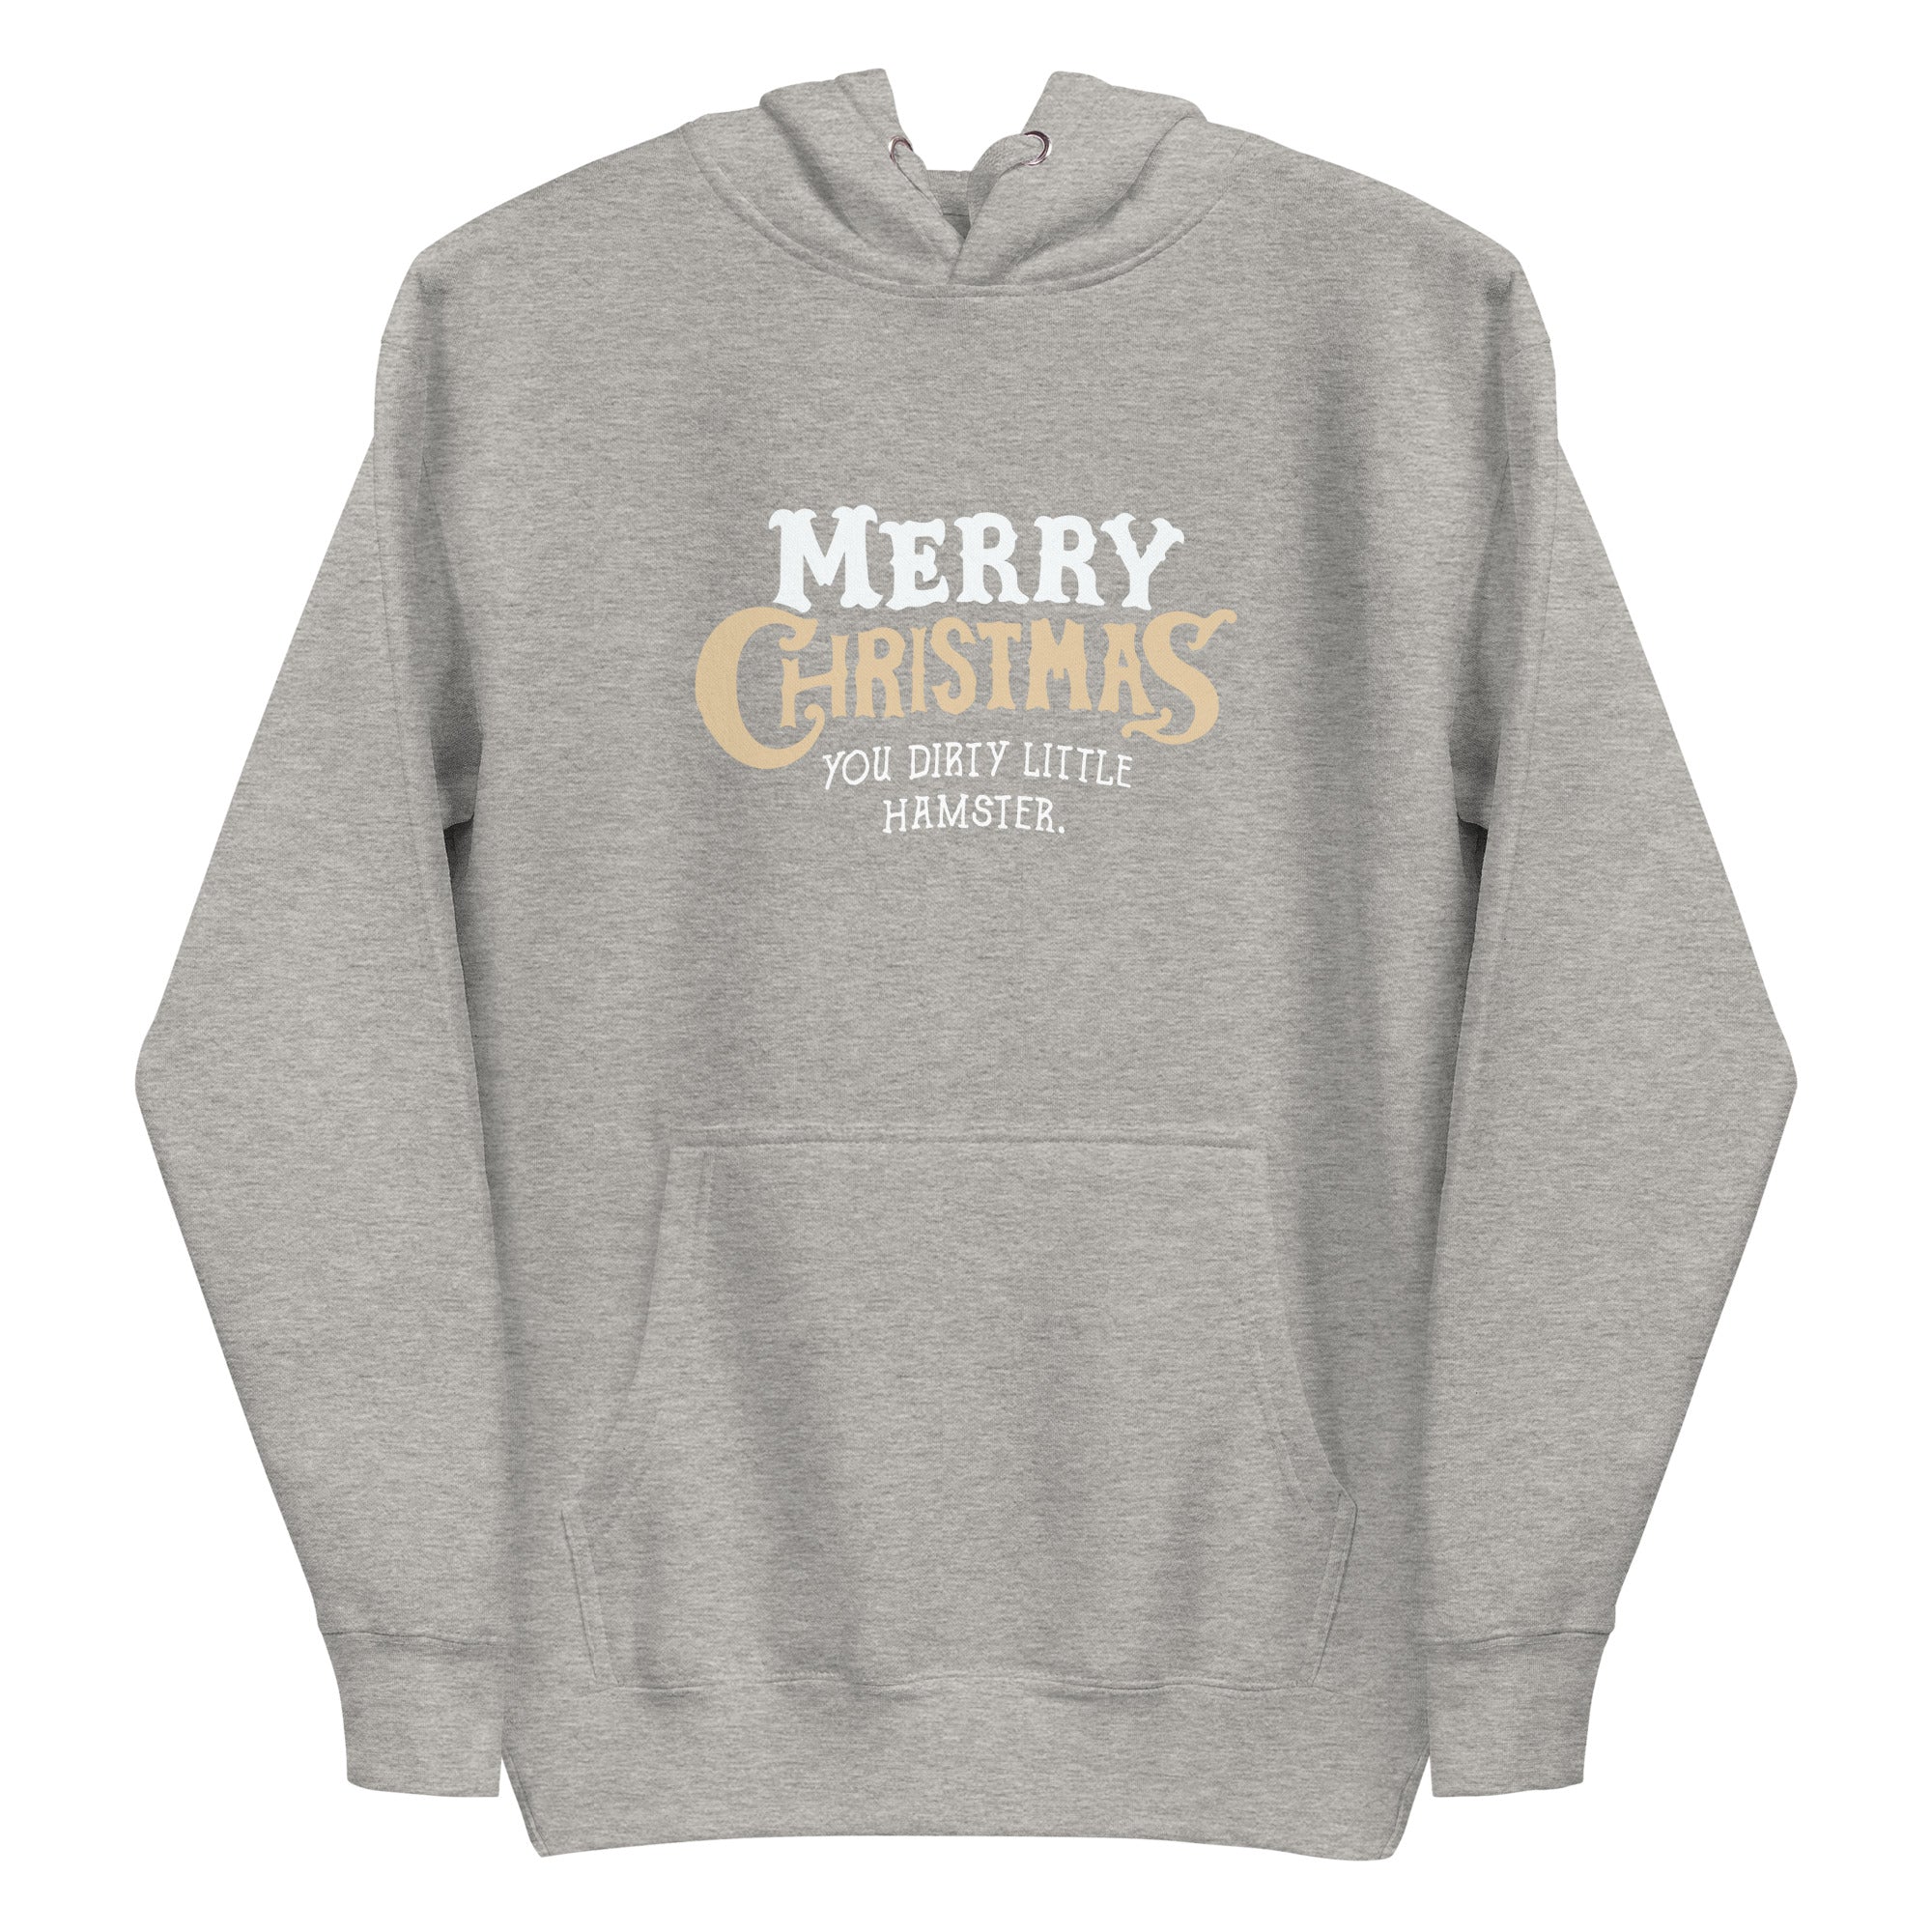 Mike Sorrentino Merry Christmas You Dirty Little Hamster Hoodie